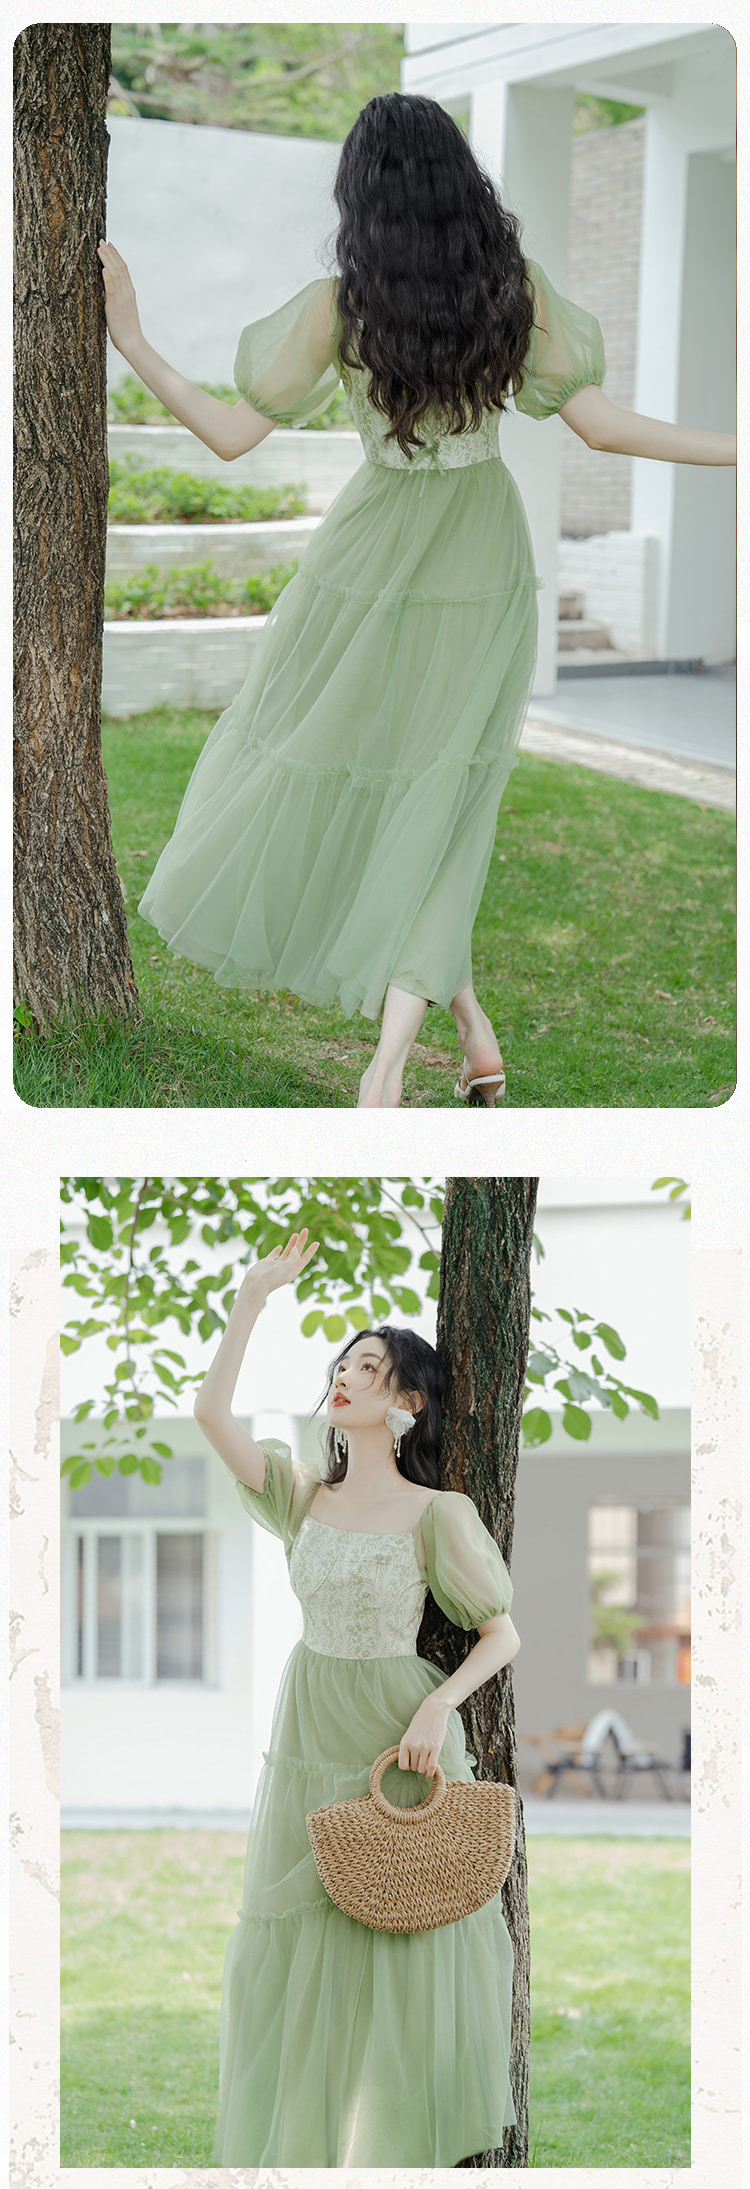 Sweet-French-Style-Green-Jacquard-Tulle-Floral-Summer-Casual-Dress09